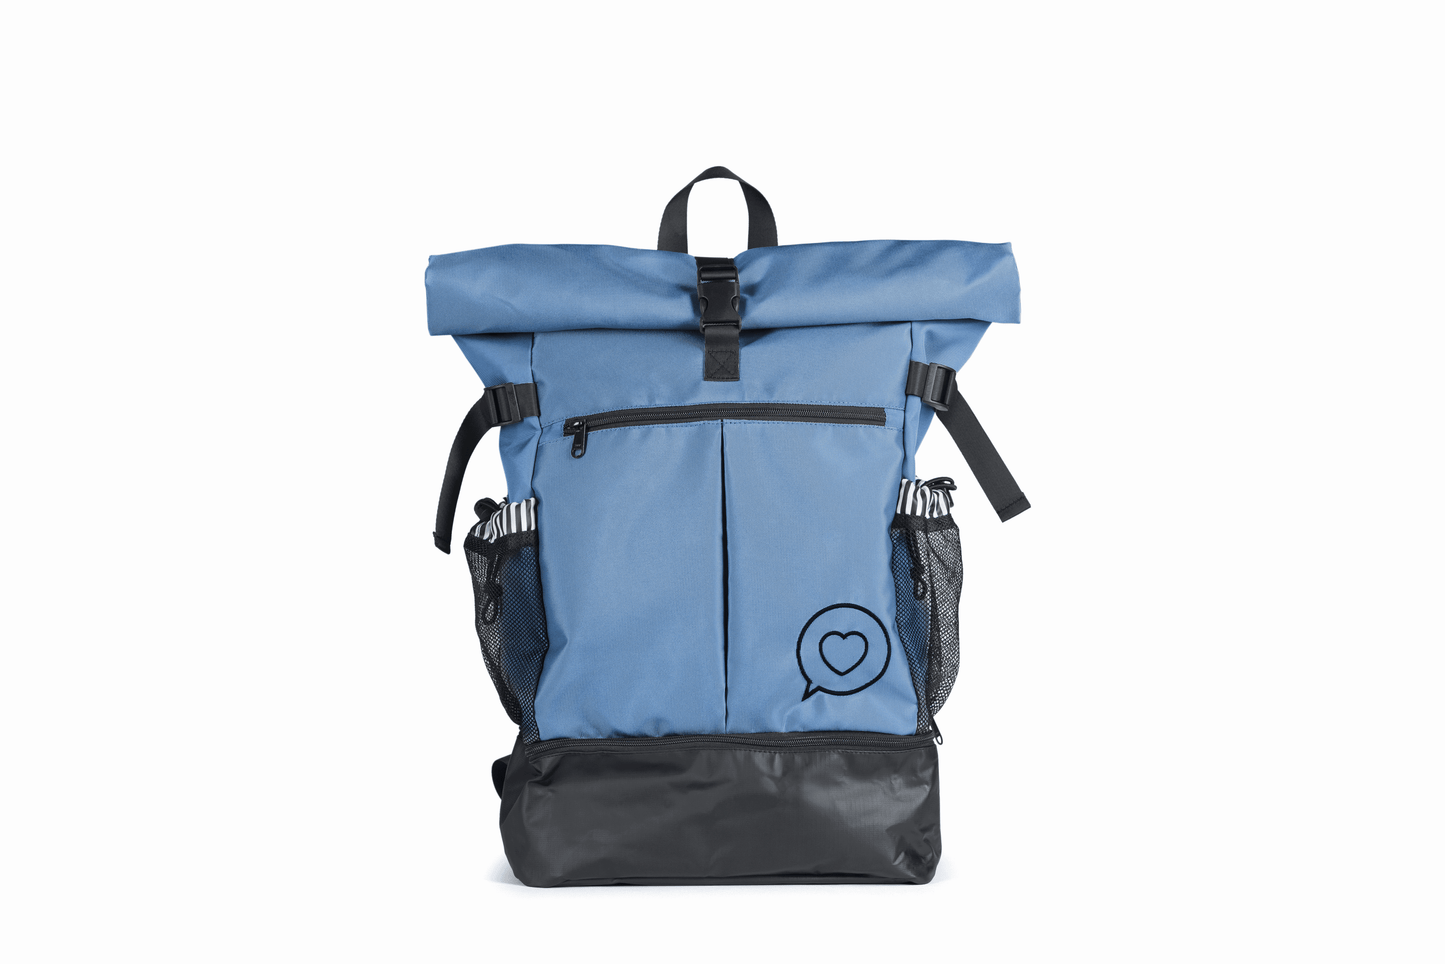  The Roo Betty Nyx Roll top back pack in Turquoise Blue